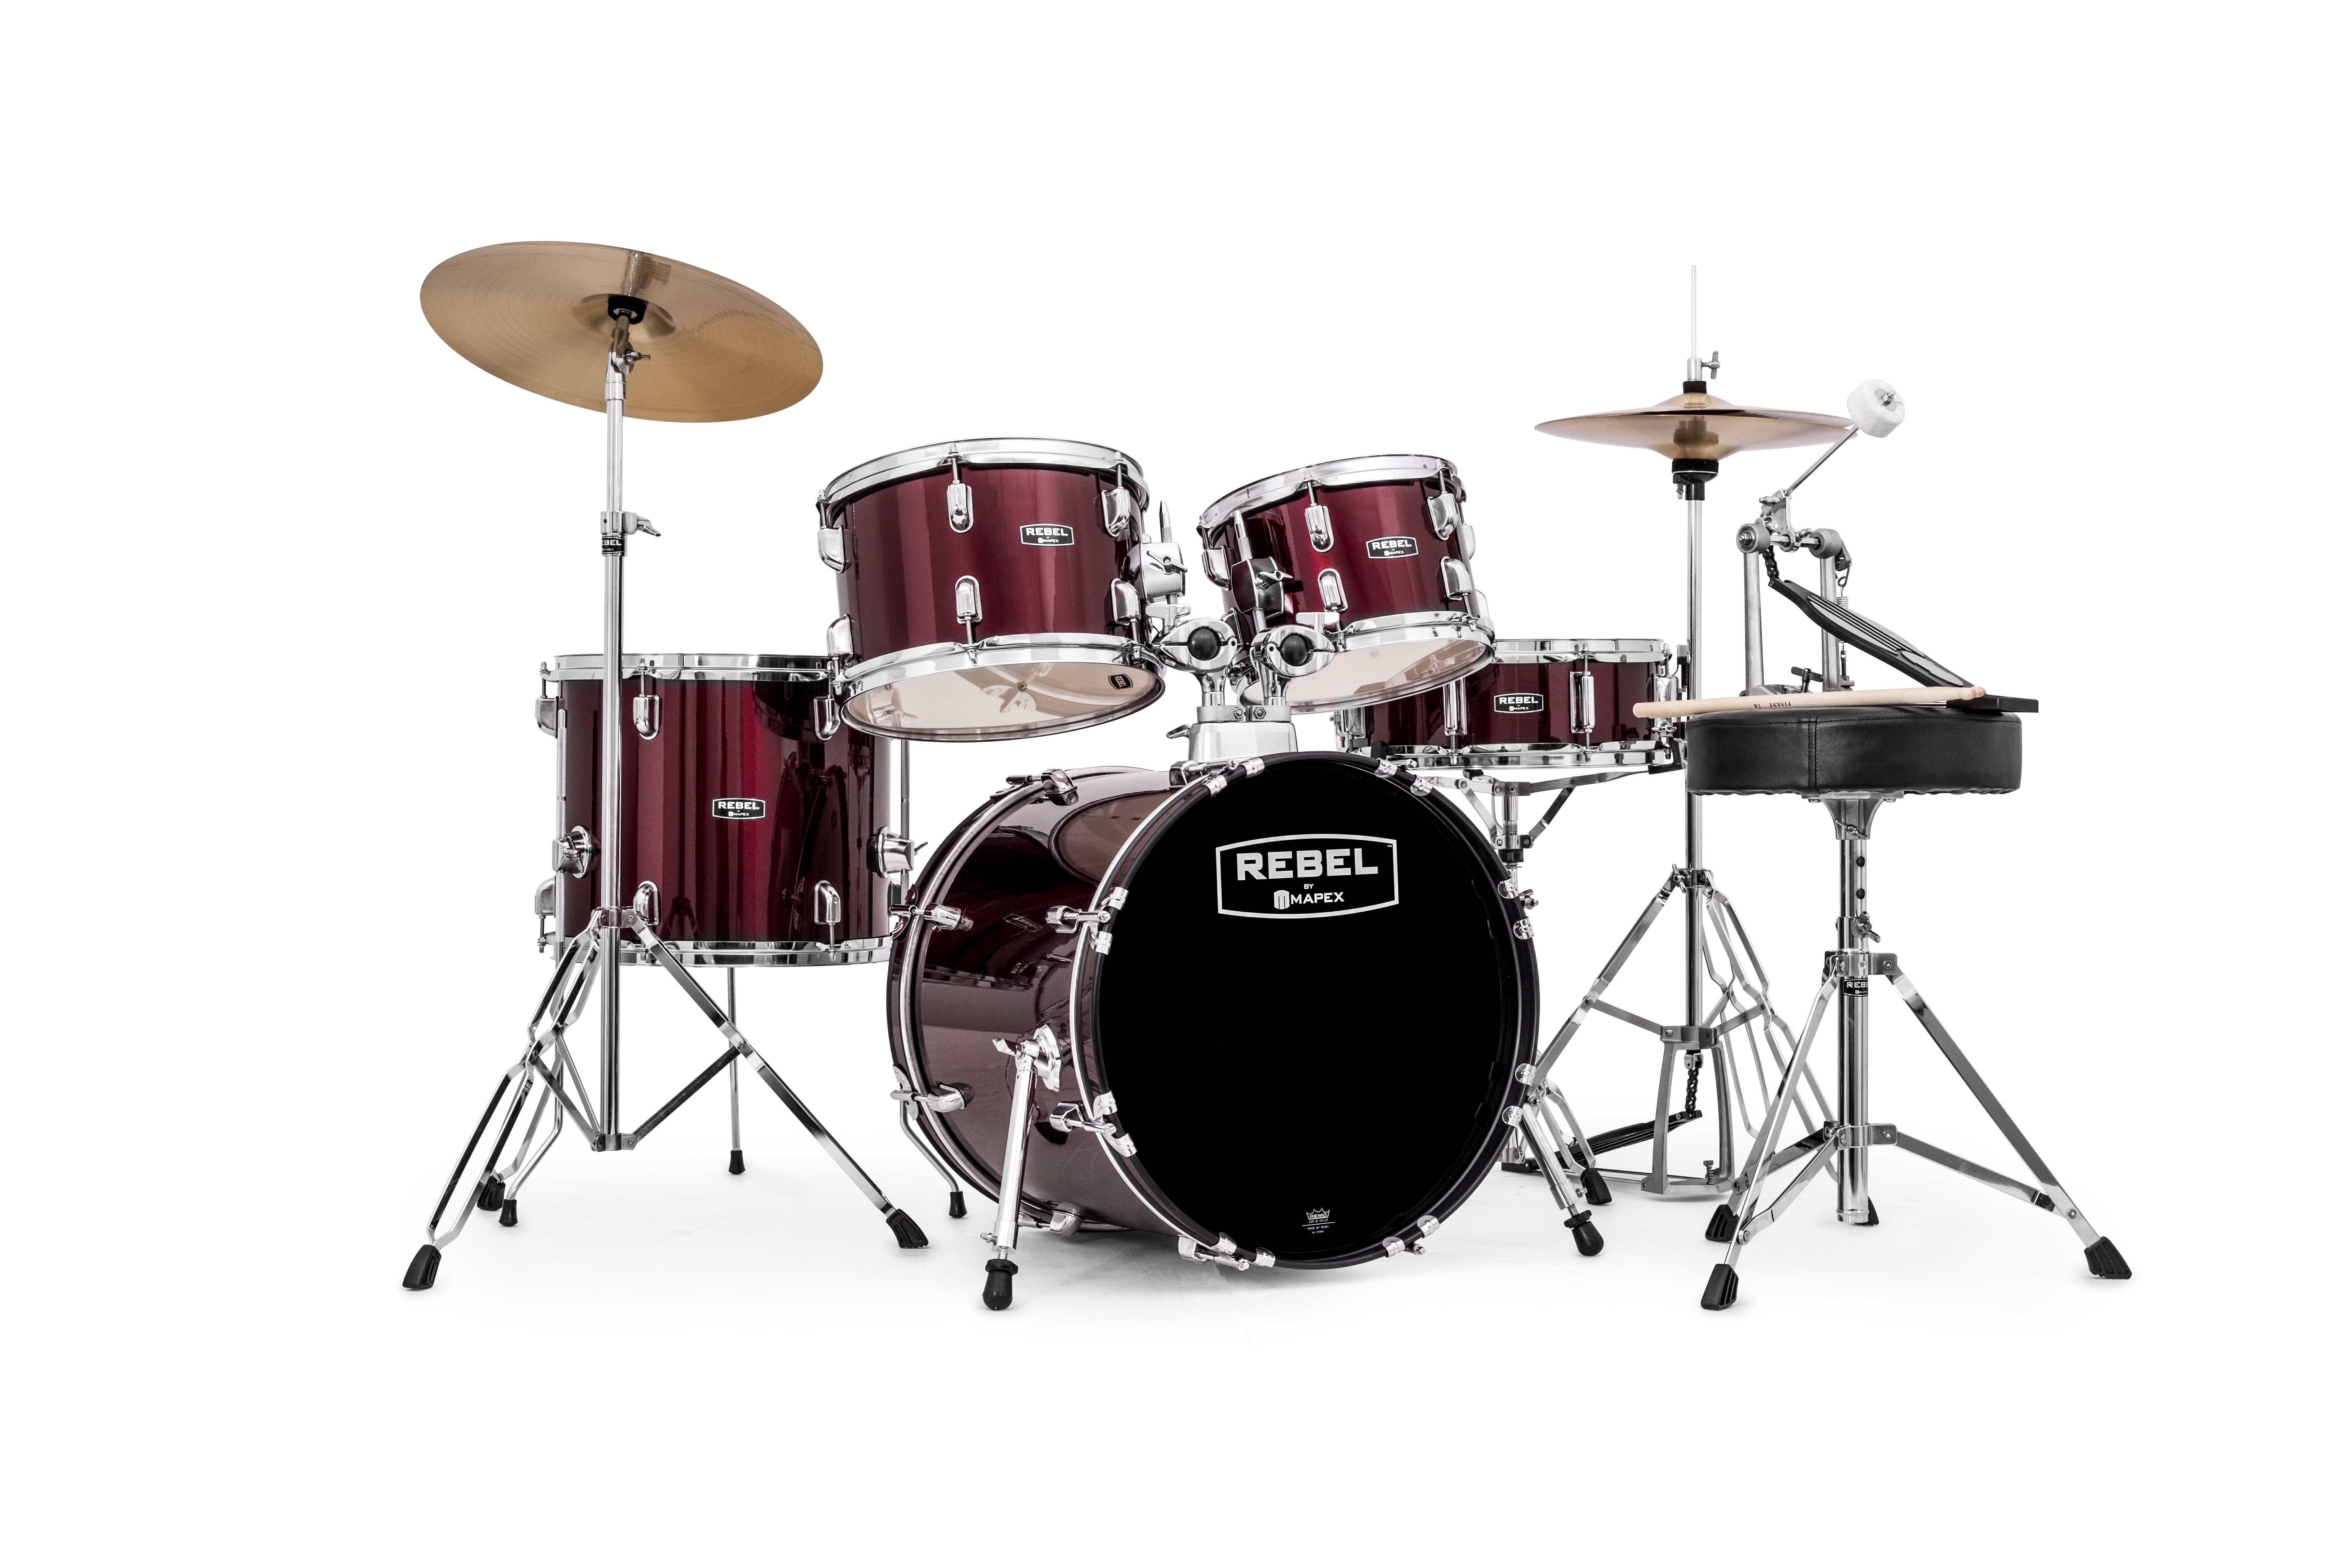 Mapex Rebel 5-piece Complete Junior Set Up with Fast Size Toms - RB5844FTCDR - Dark Red